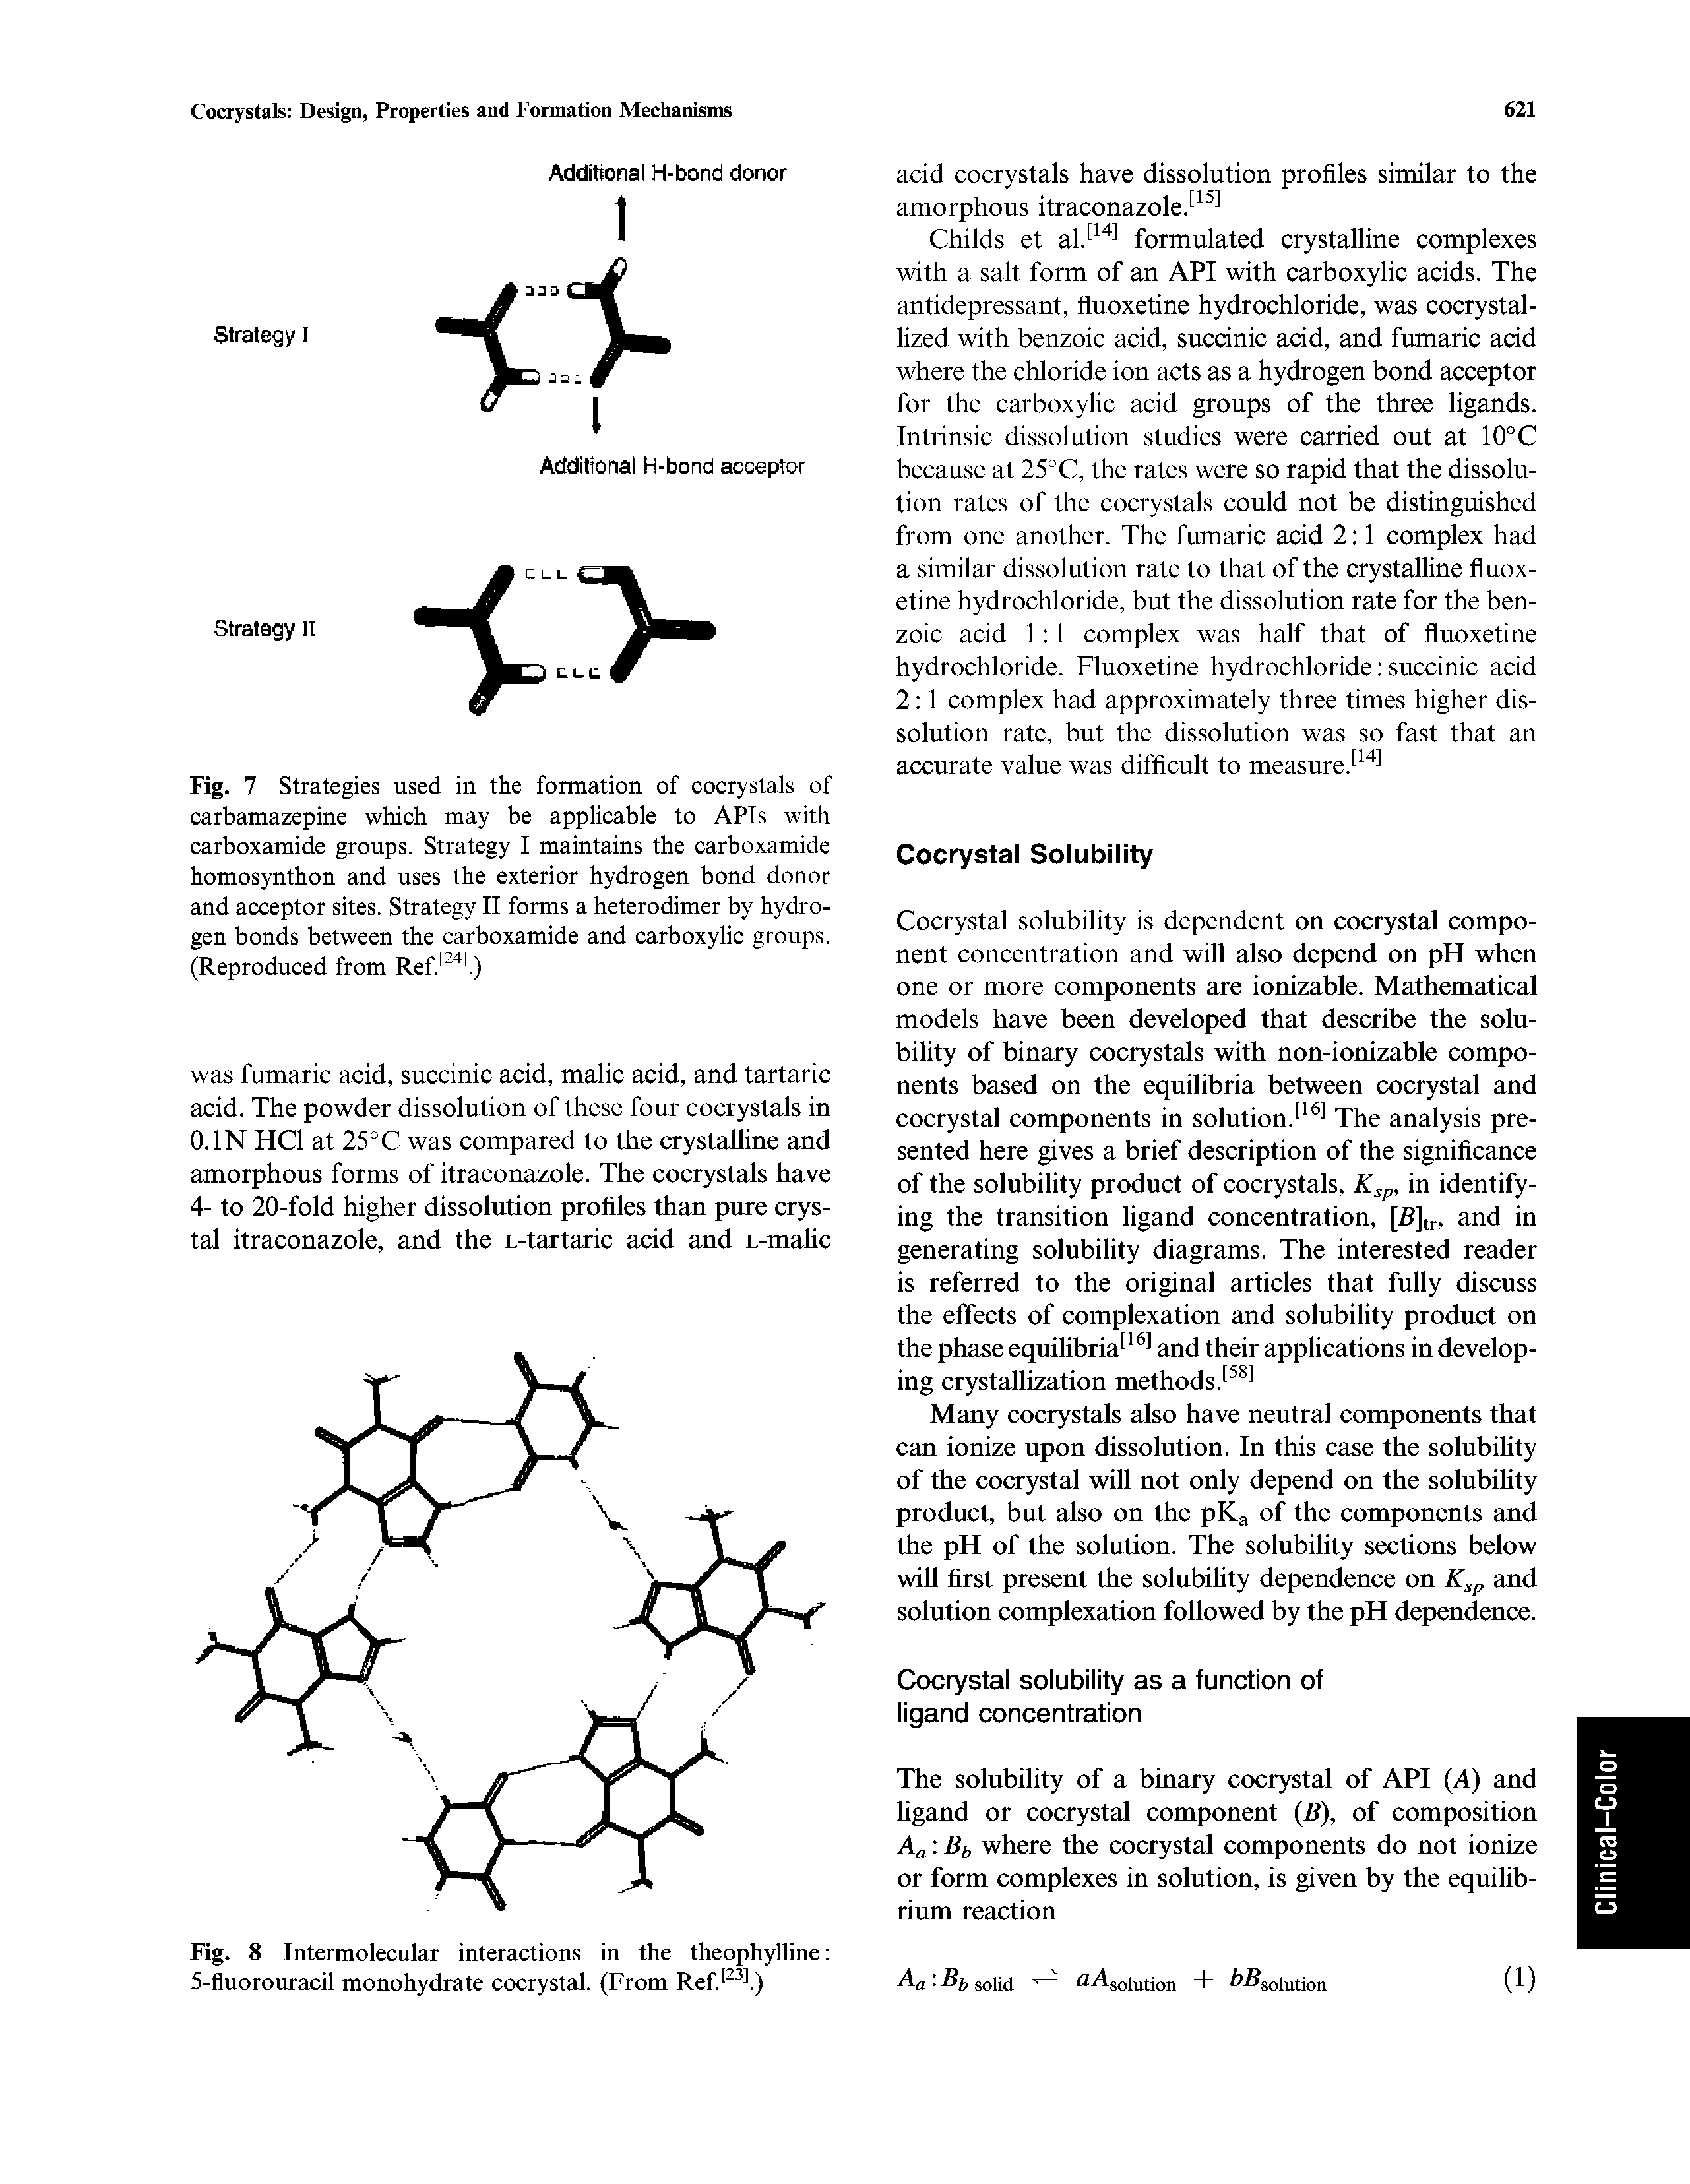 Fig. 7 Strategies used in the formation of cocrystals of carbamazepine which may be applicable to APIs with carboxamide groups. Strategy I maintains the carboxamide homosynthon and uses the exterior hydrogen bond donor and acceptor sites. Strategy II forms a heterodimer by hydrogen bonds between the carboxamide and carboxylic groups. (Reproduced from Ref " l)...